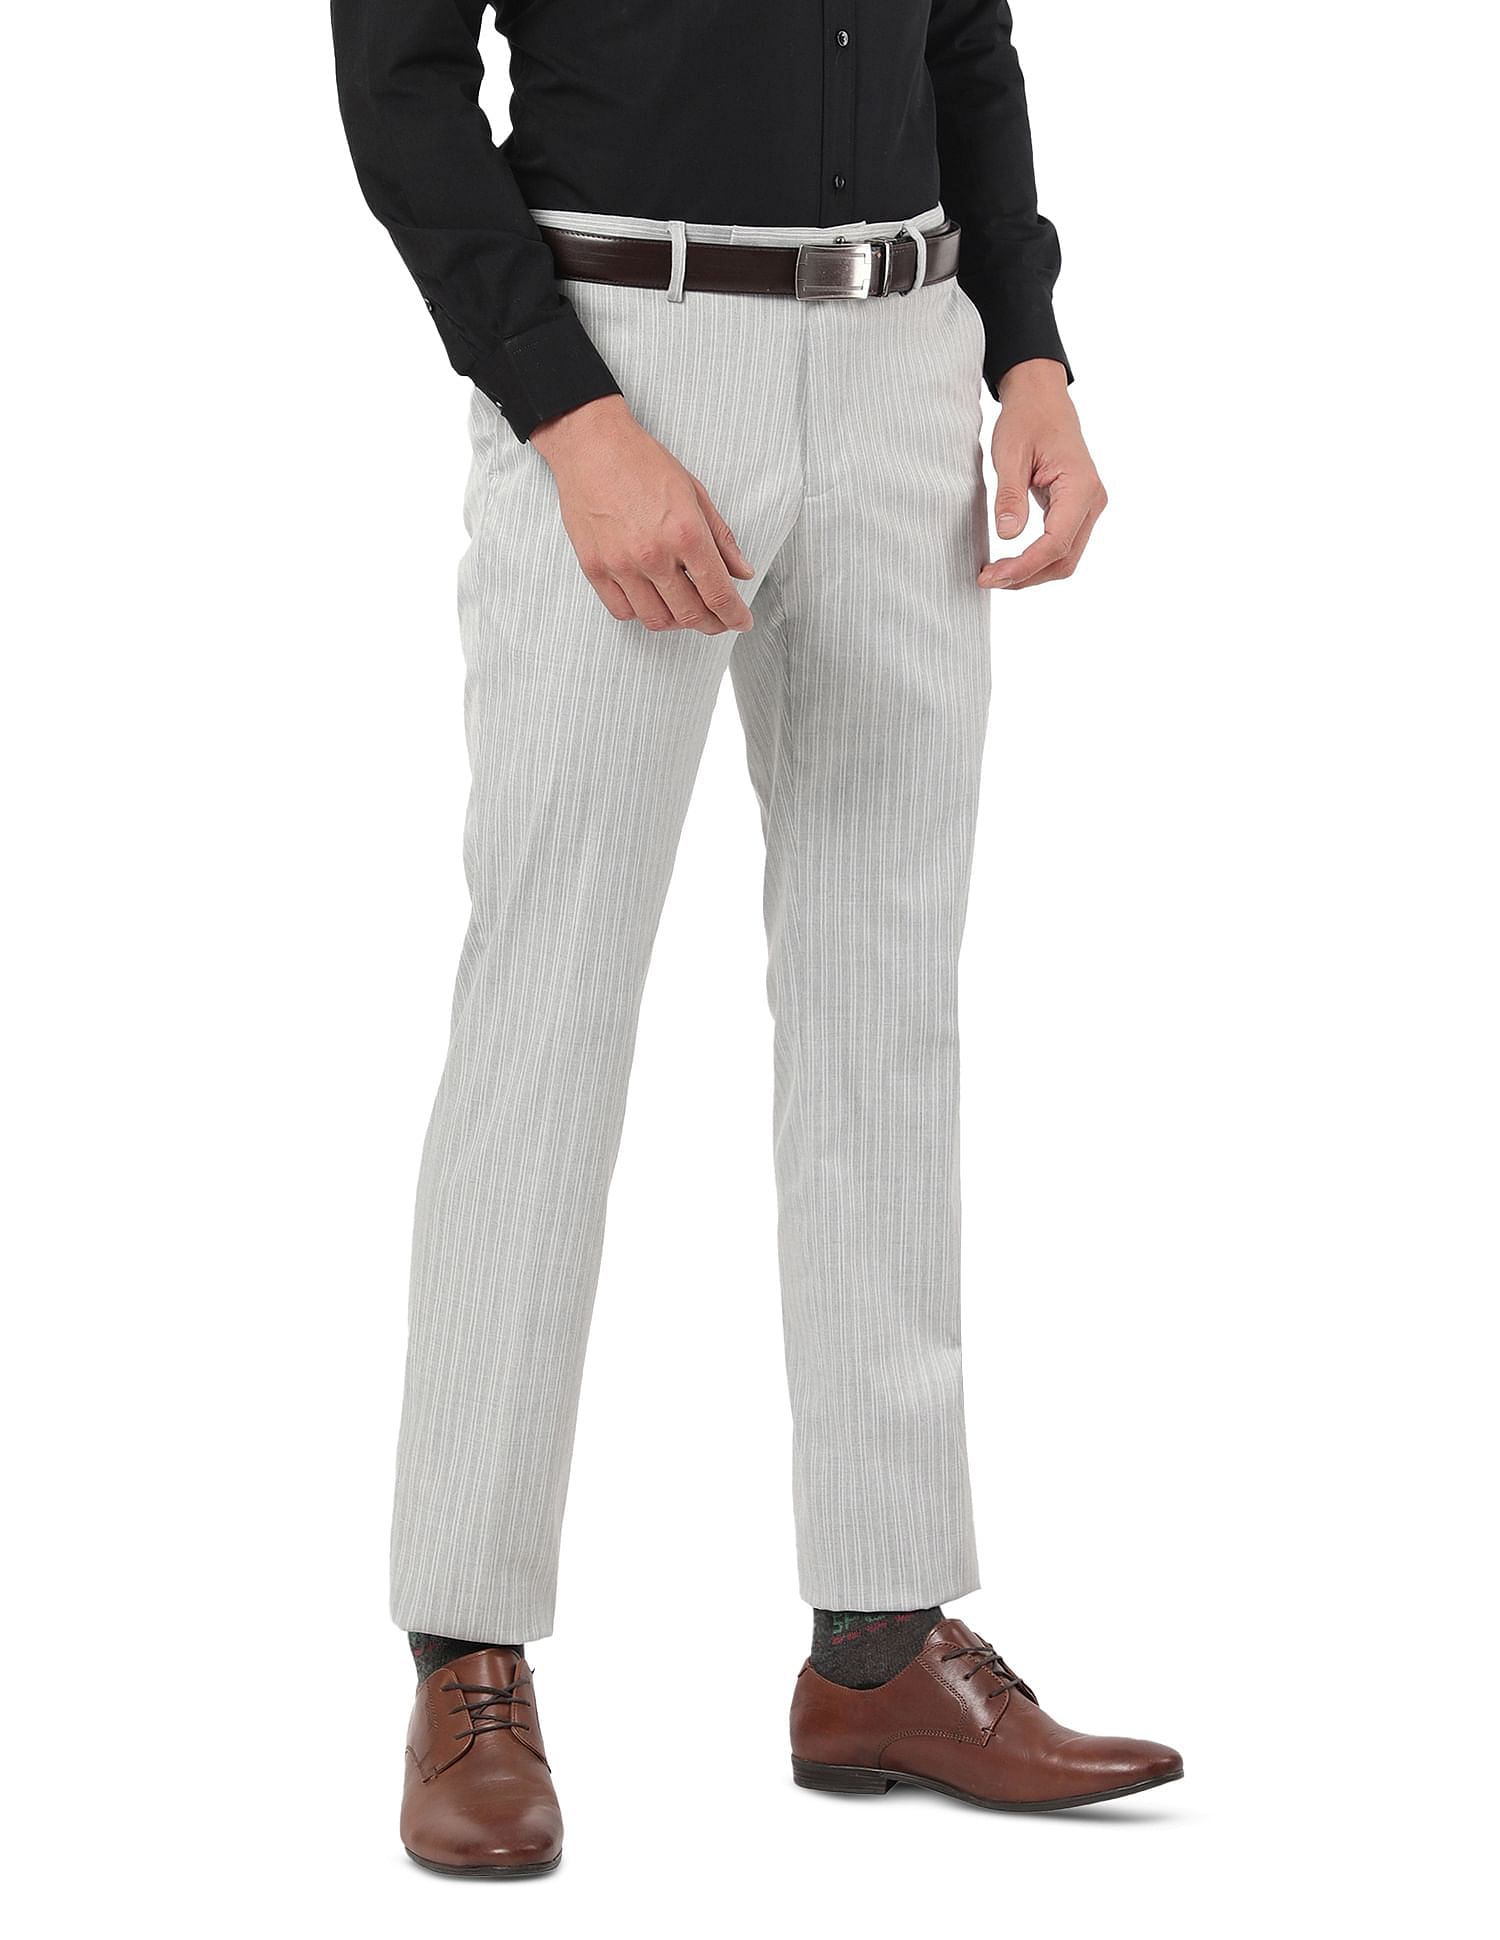 Regular striped trousers  Buy Regular striped trousers online in India